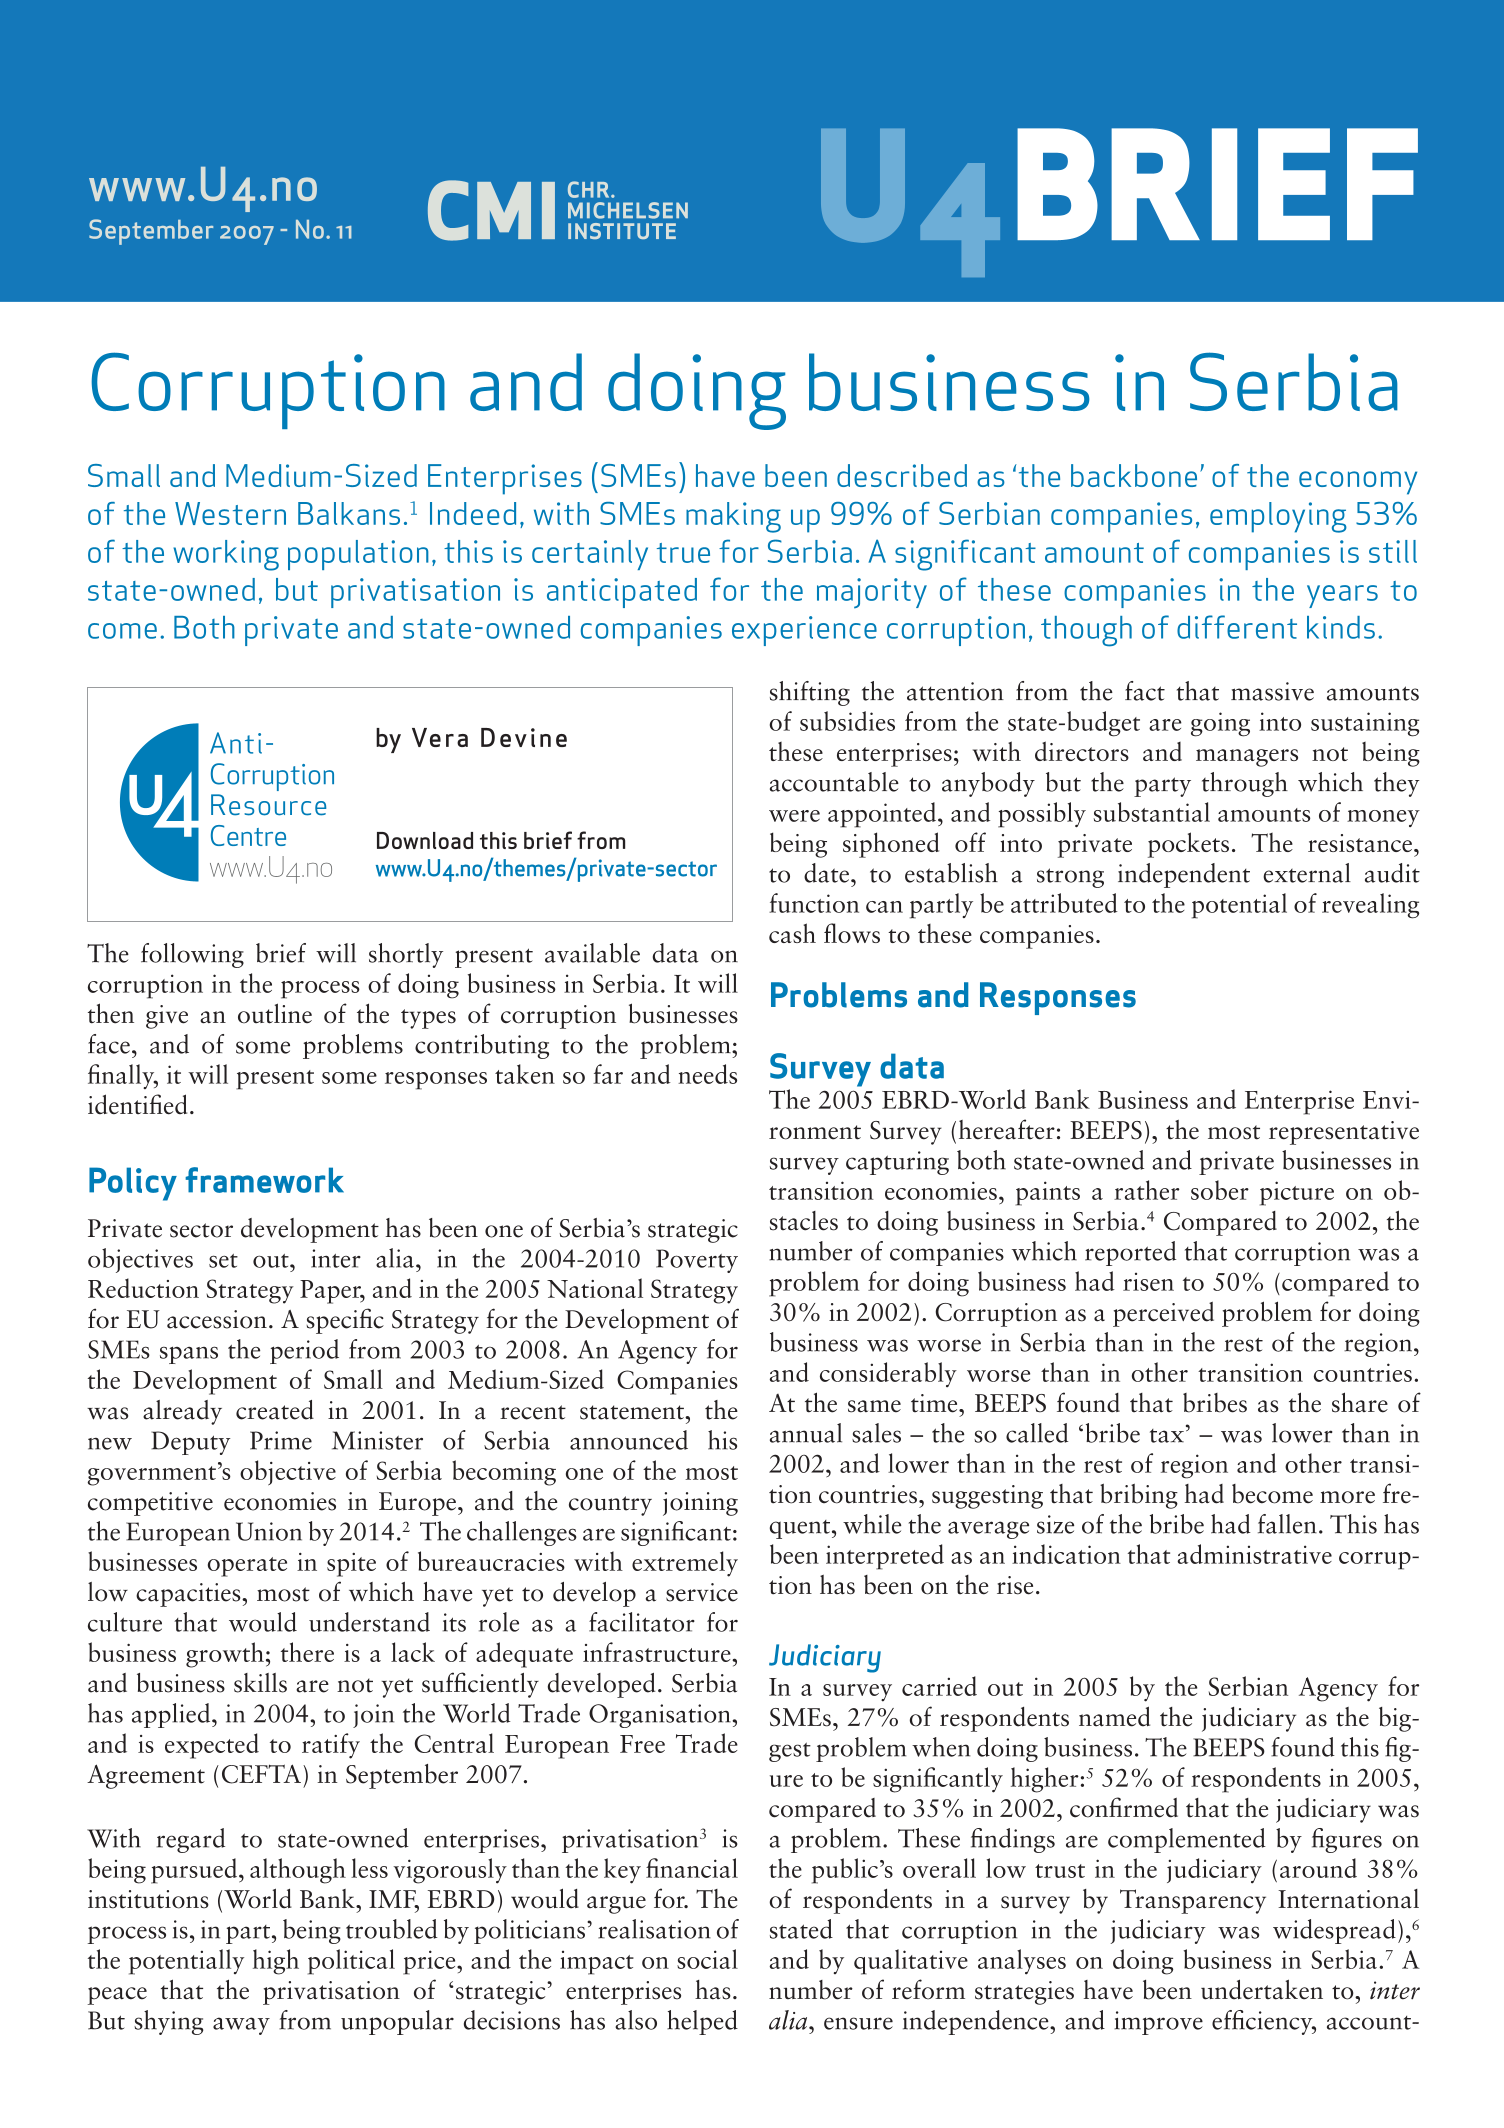 Corruption and doing business in Serbia